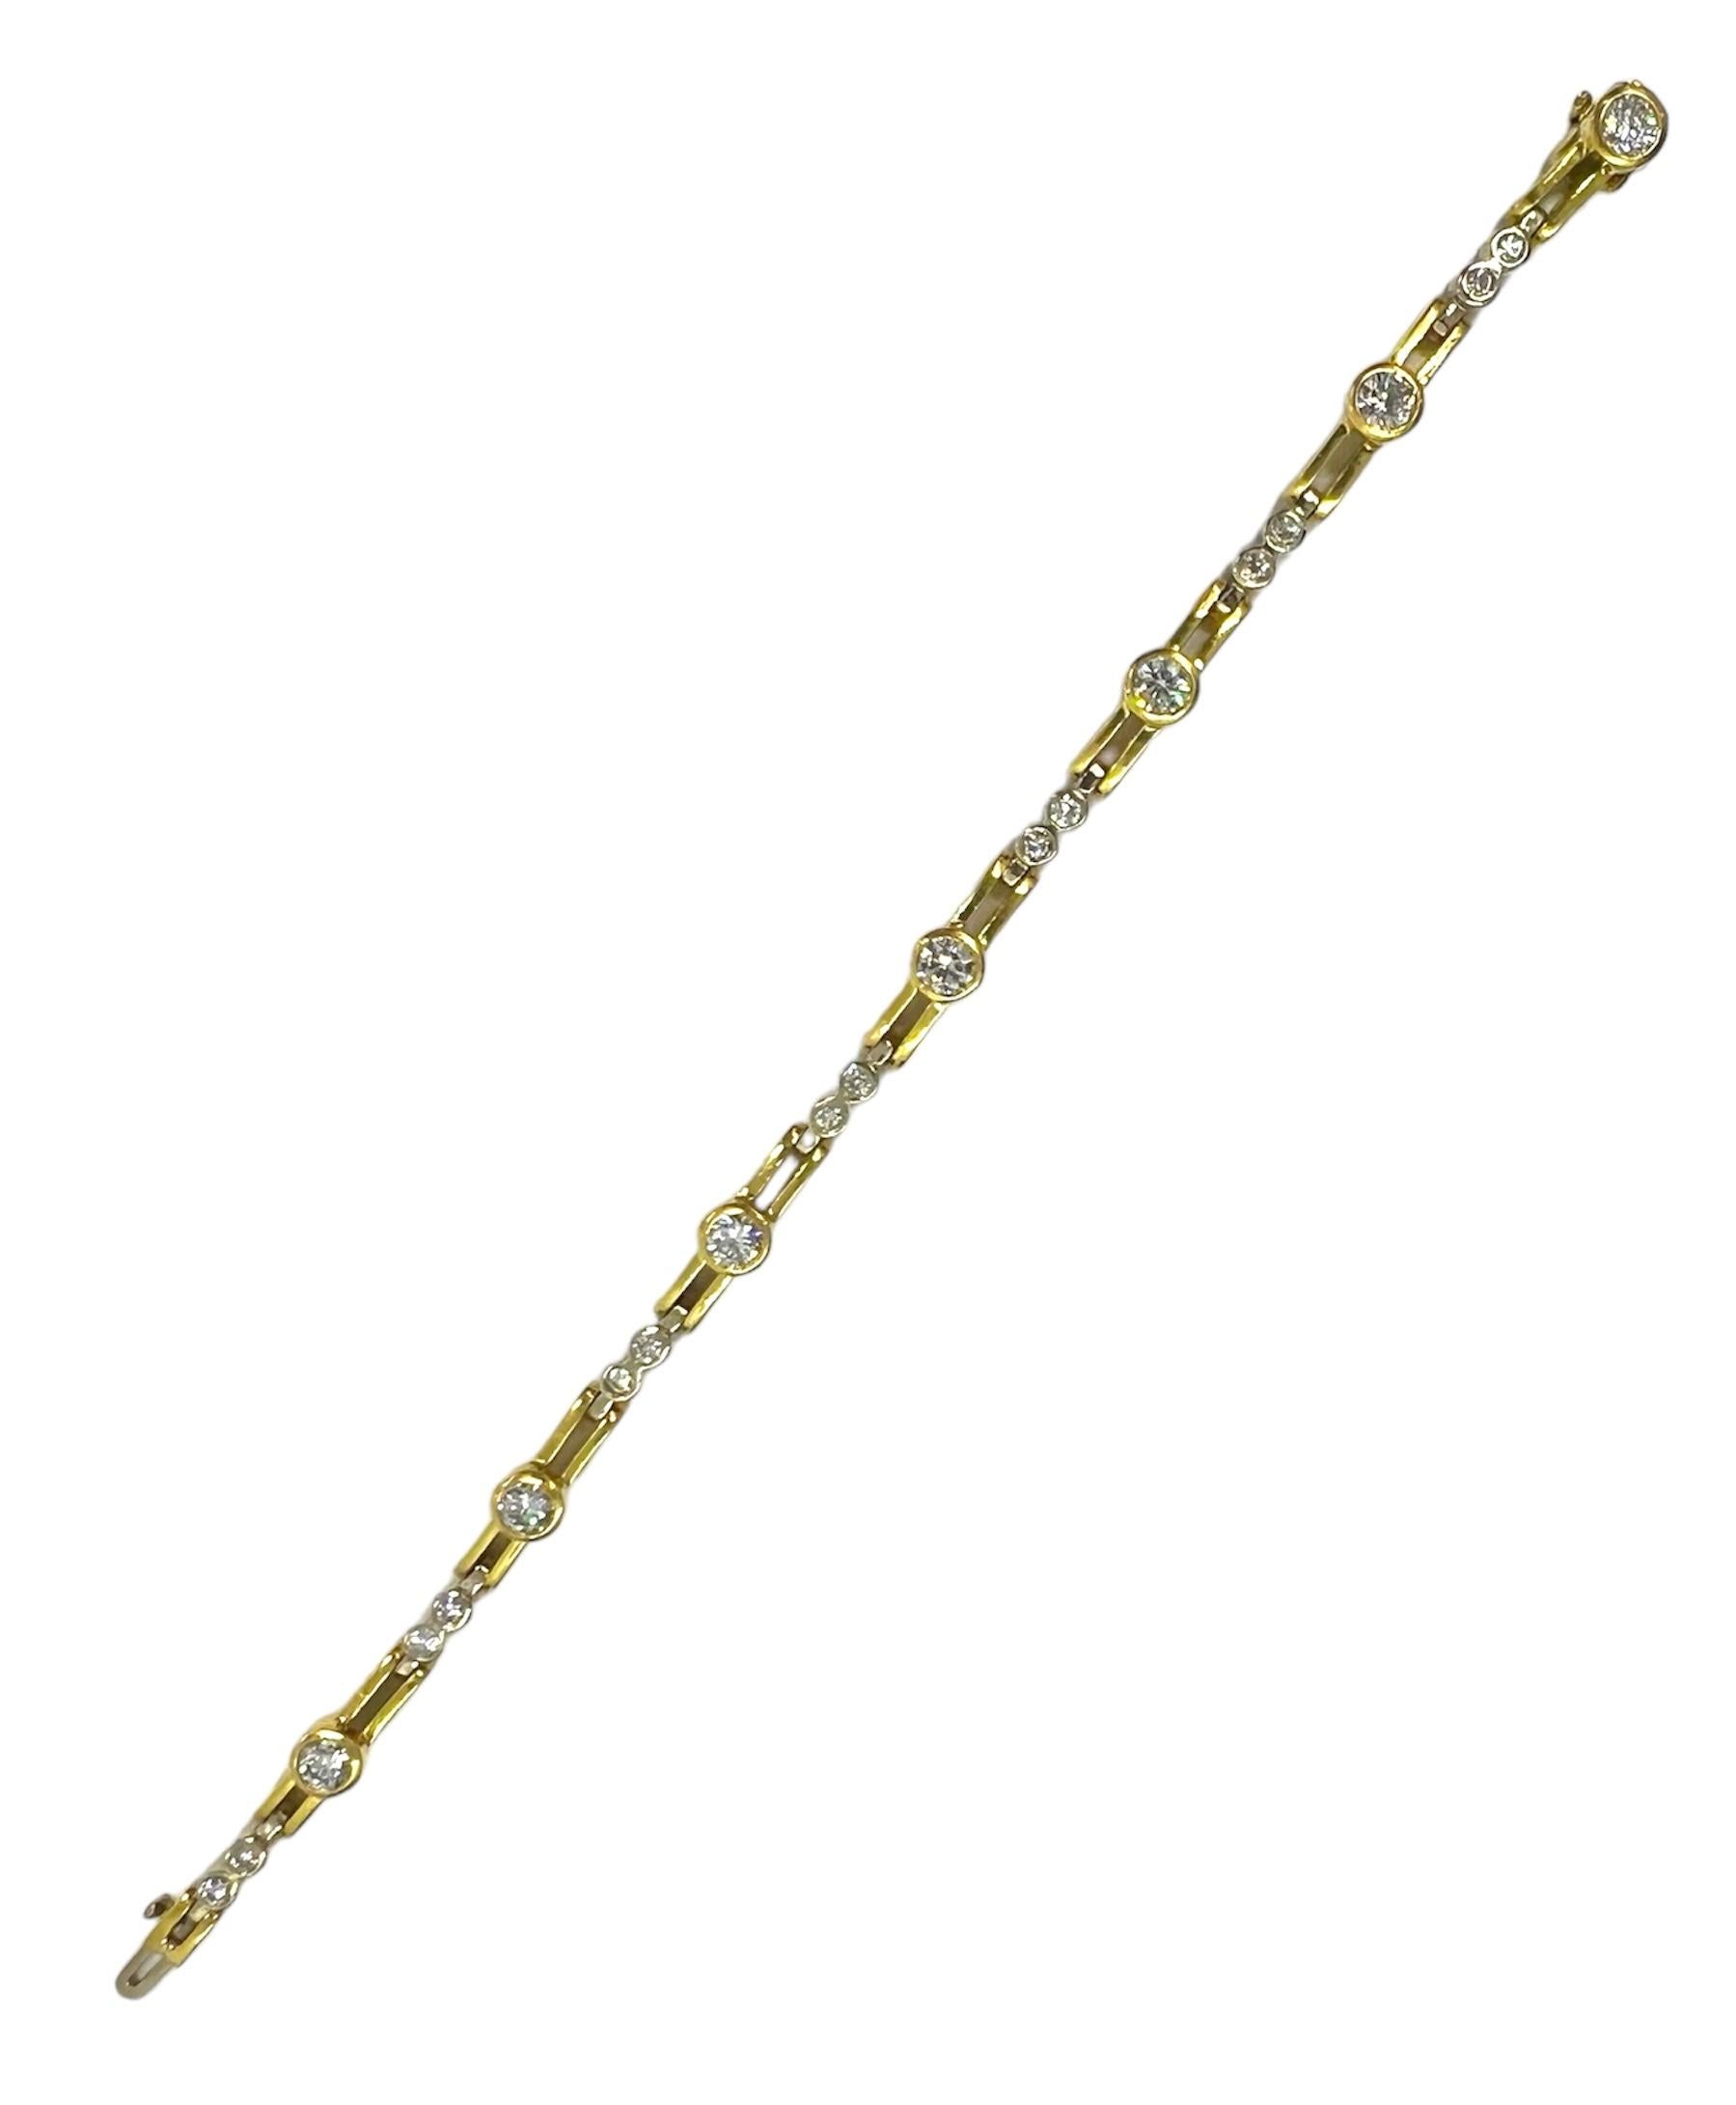 18K yellow gold bracelet with round diamonds.

Sophia D by Joseph Dardashti LTD has been known worldwide for 35 years and are inspired by classic Art Deco design that merges with modern manufacturing techniques.

